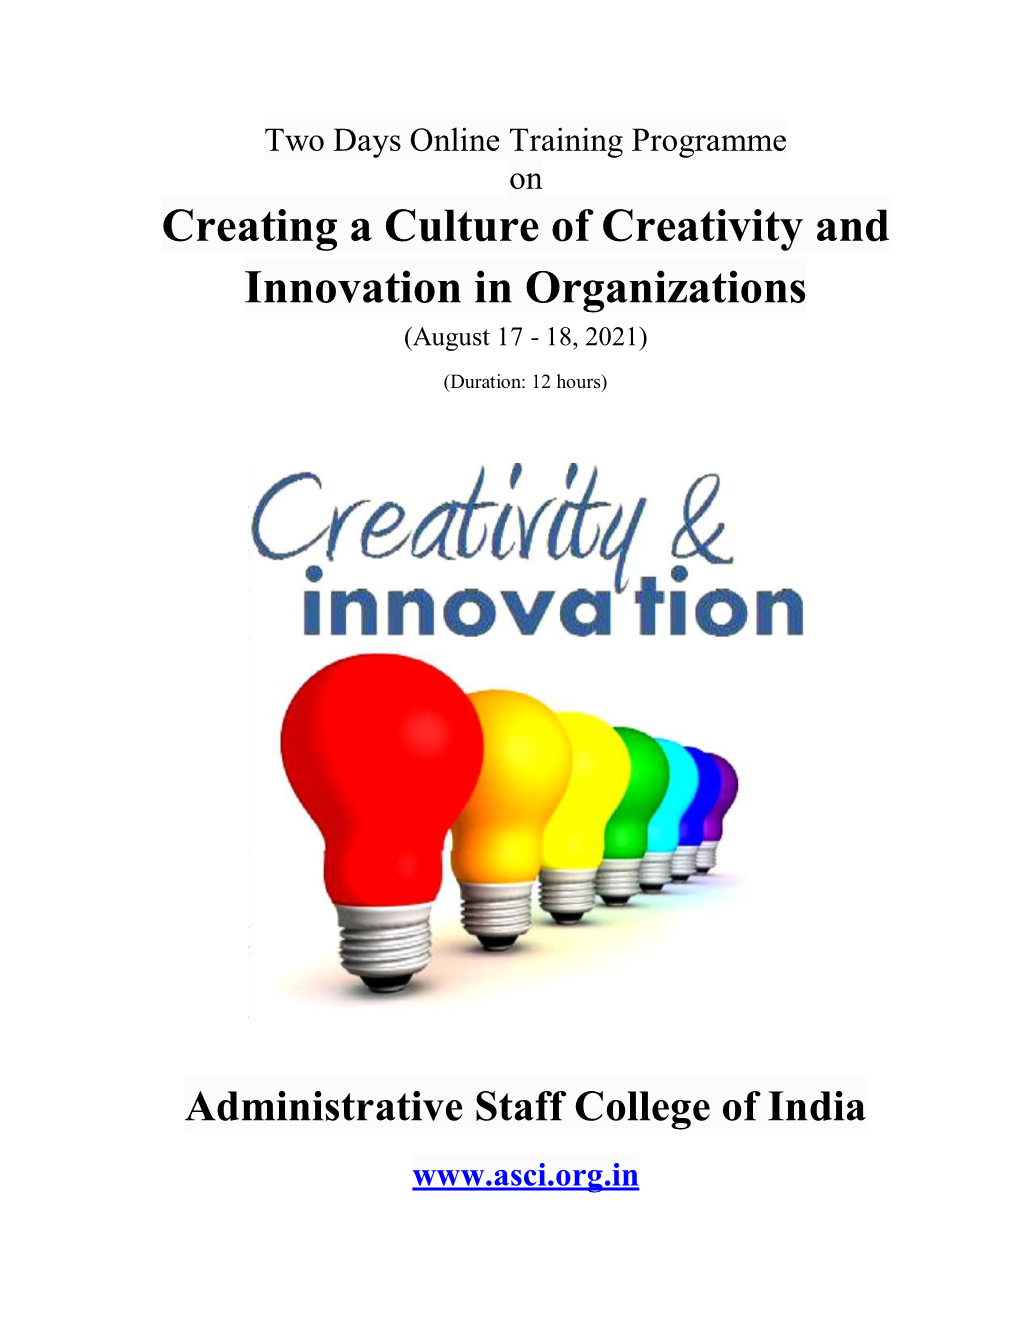 Creating a Culture of Creativity and Innovation in Organizations (August 17 - 18, 2021)